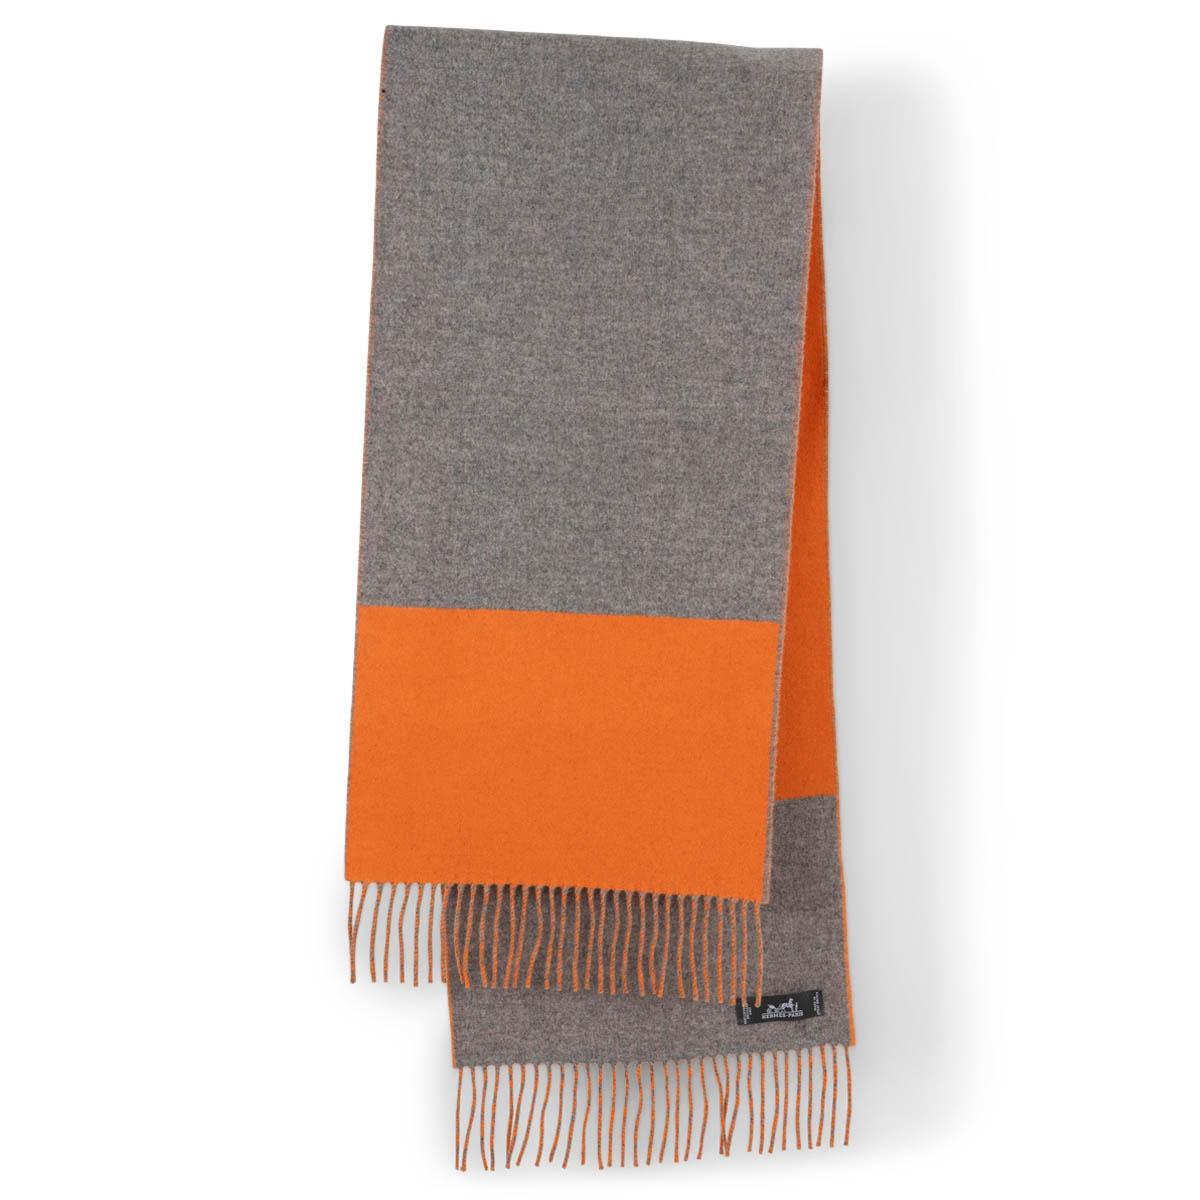 100% authentic Hermès Casaque muffler in Gris Chine grey and Mandarine orange cashmere (100%) with fringed ends. Brand new.

Measurements
Model	H258091S 12
Width	30cm (11.7in)
Length	140cm (54.6in)

All our listings include only the listed item